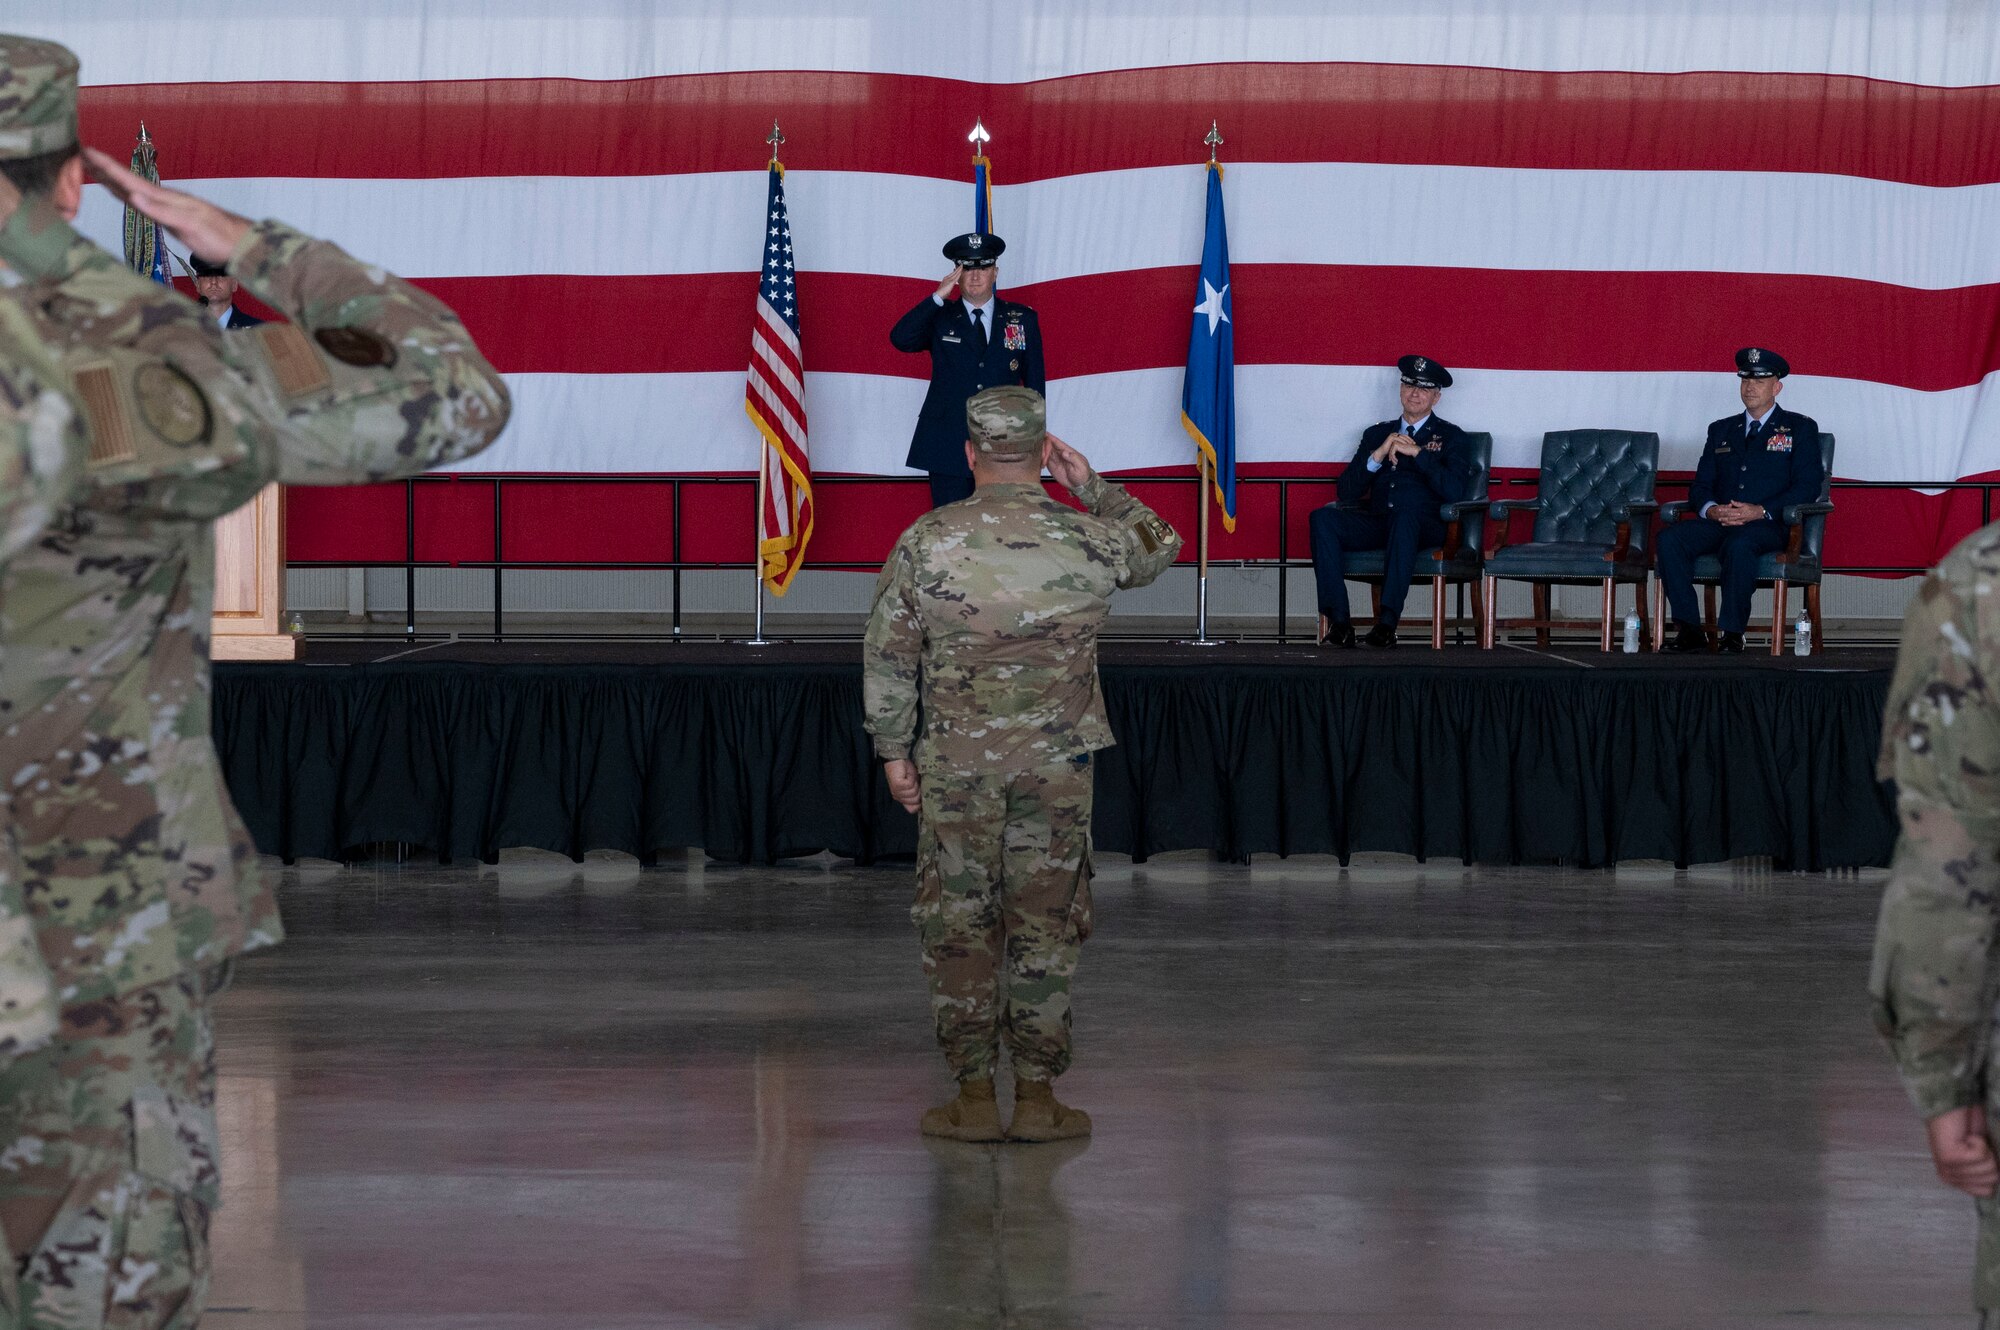 U.S. Air Force col. Craig Prather, former 47th Flying Training Wing commander, returns a final salute as commander to 47th Flying Training Wing members during a change of command ceremony at Laughlin Air Force Base, Texas, July 22, 2022. As commander, Davidson will oversee nearly 2,800 military and civilian personnel engaged in executing more than 61,000 aircraft sorties yearly in support of  Laughlin's Specialized Undergraduate Pilot Training mission. (U.S. Air Force photo by Airman 1st Class Kailee Reynolds)